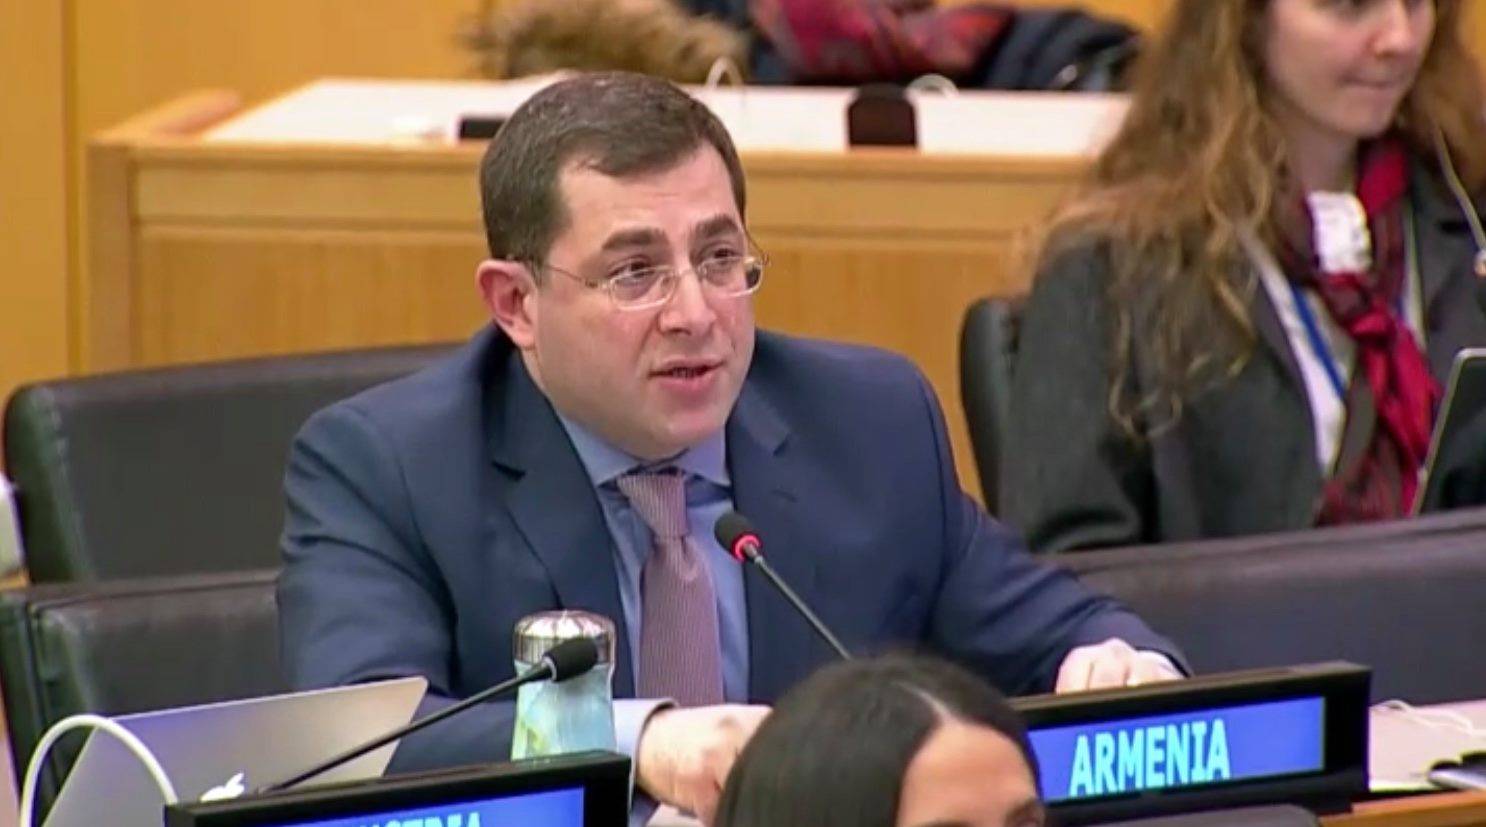 Remarks by H.E. Mher Margaryan, Permanent Representative of Armenia to the United Nations at the UN Women Executive Board First Regular Session